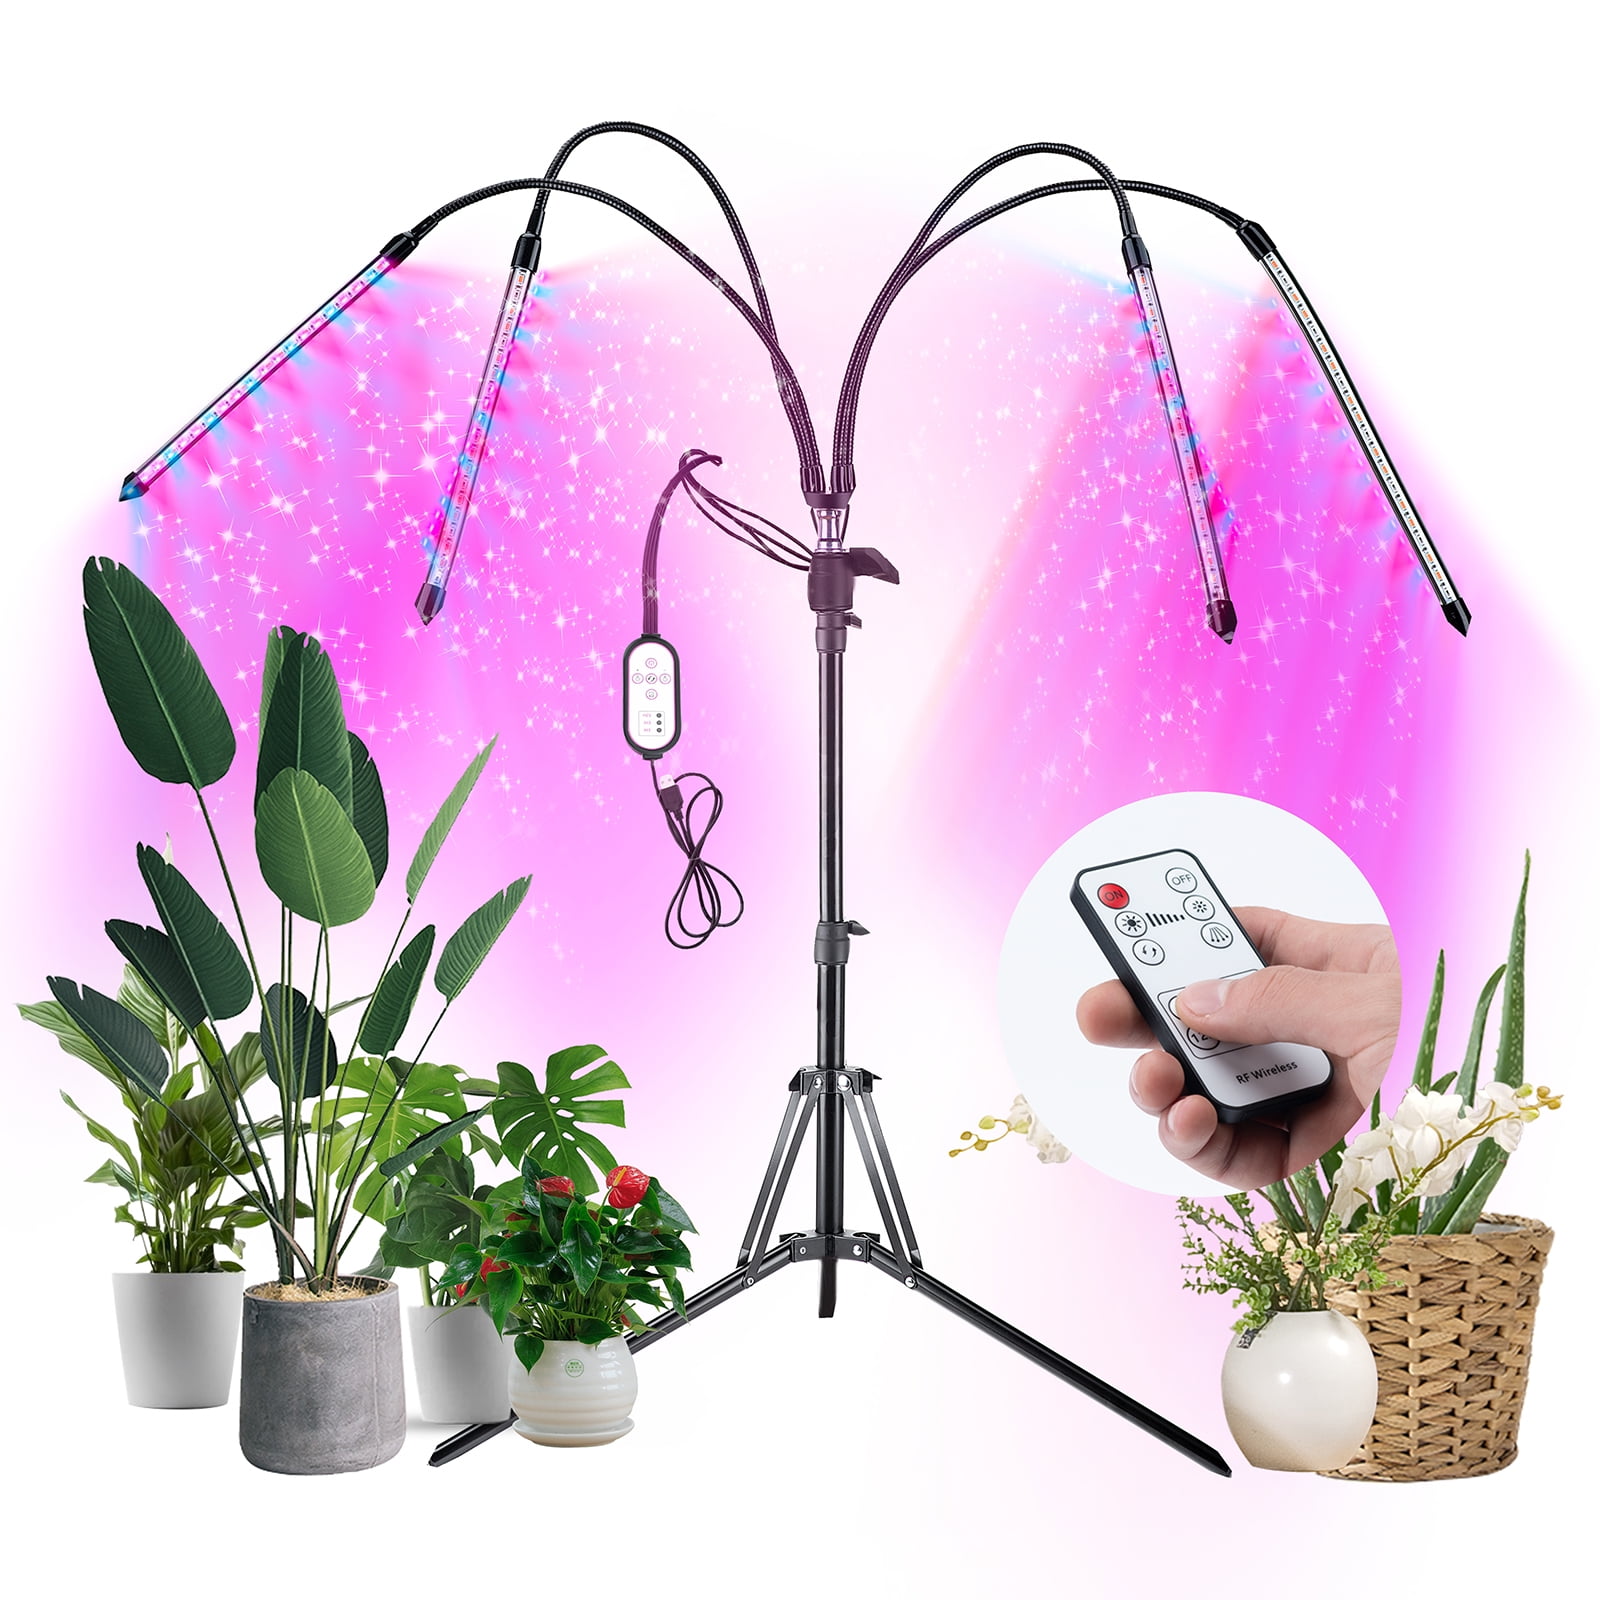 Details about   LED Grow Light 4 Head Plant Growing Lamp Lights for Indoor Plants Hydroponics US 